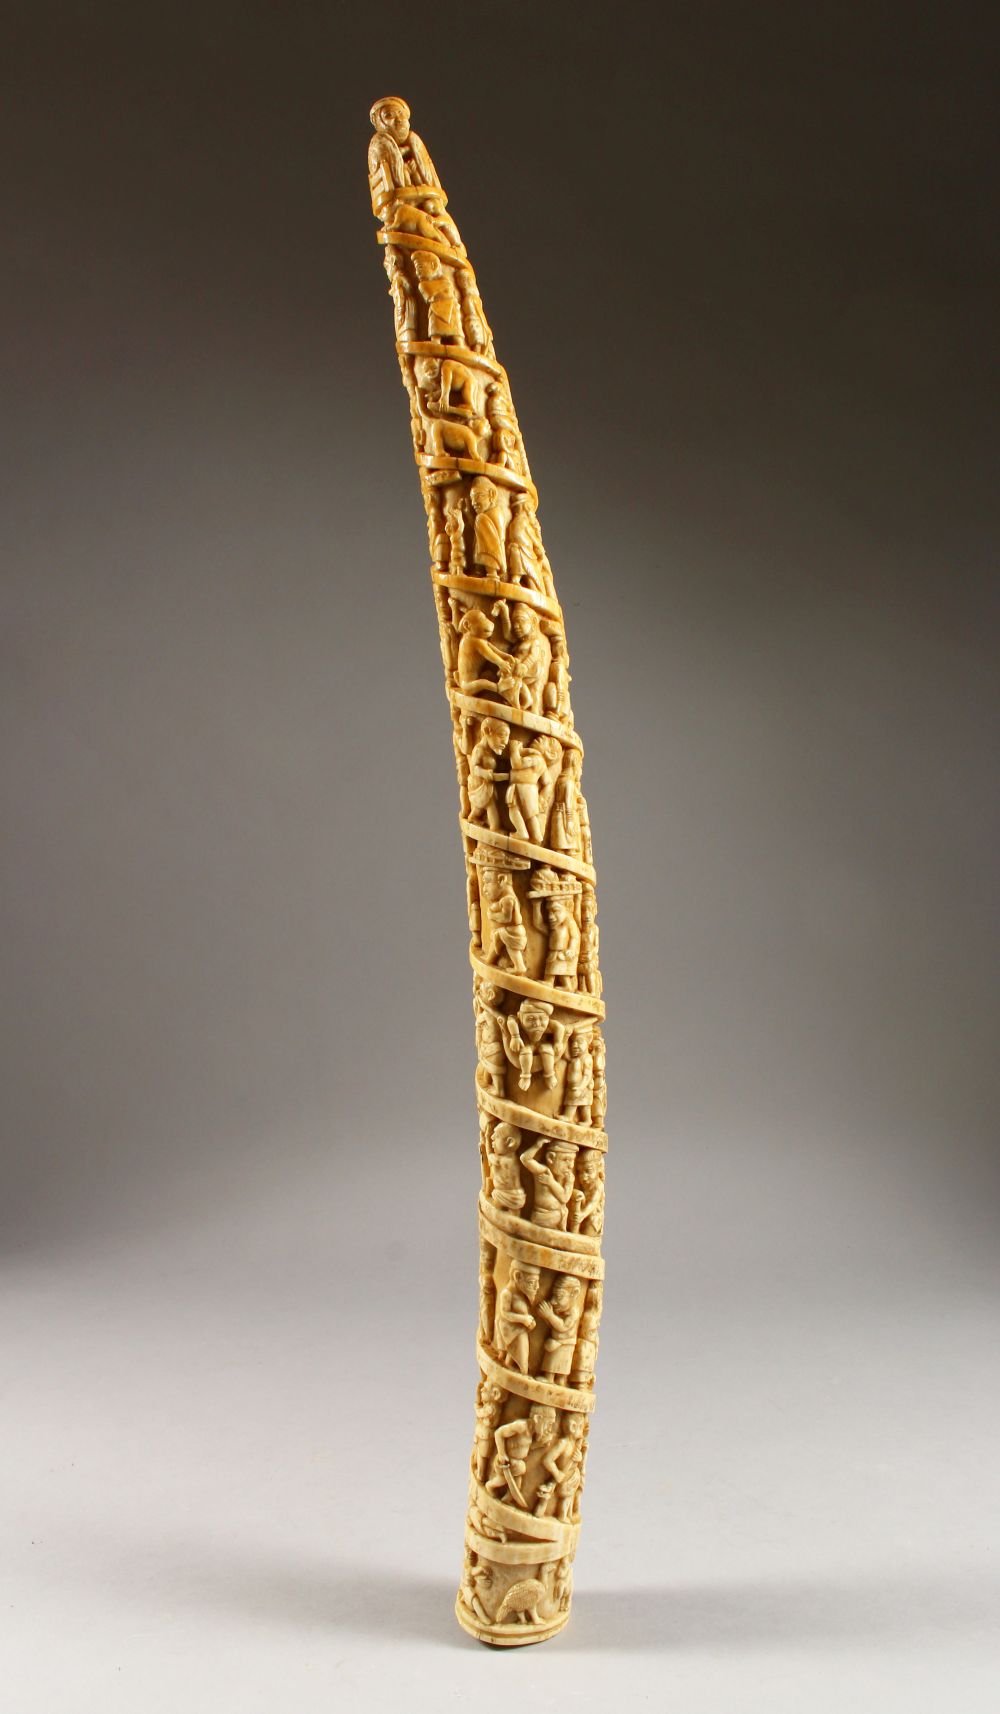 A 19TH CENTURY OR EARLIER ETHNIC / ASIAN CARVED IVORY TUSK SECTION, profusely carved with scenes